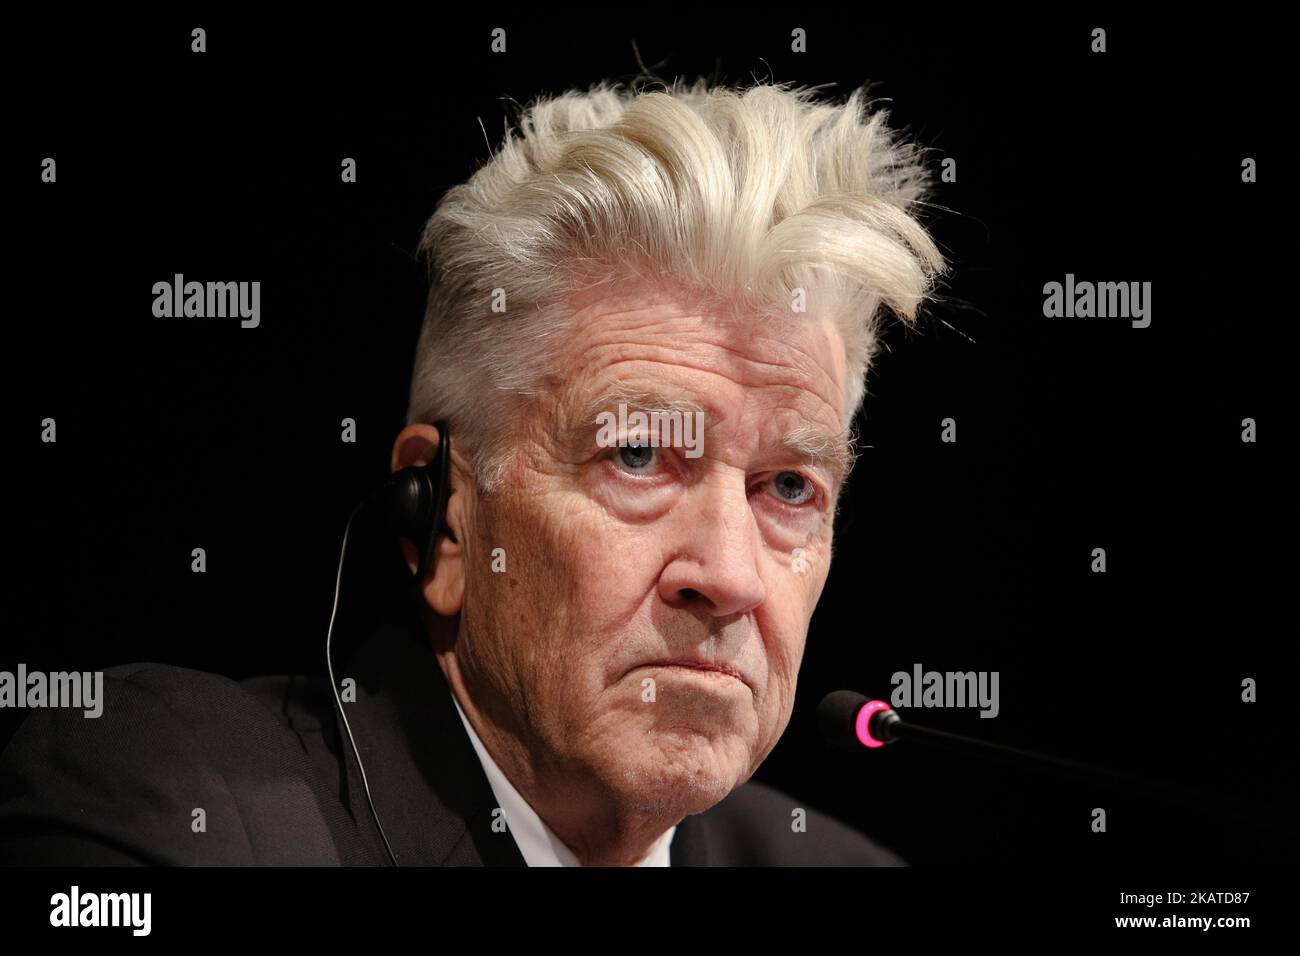 US director David Lynch is seen at his press-conference in Kiev, Ukraine,Nov. 17, 2017. Lynch announced the launch of his charity David Lynch Foundation in Eastern Europe based in Kiev to combat post-traumatic stress disorder (PTSD) and stress through Transcendental Meditation program. (Photo by Sergii Kharchenko/NurPhoto) Stock Photo